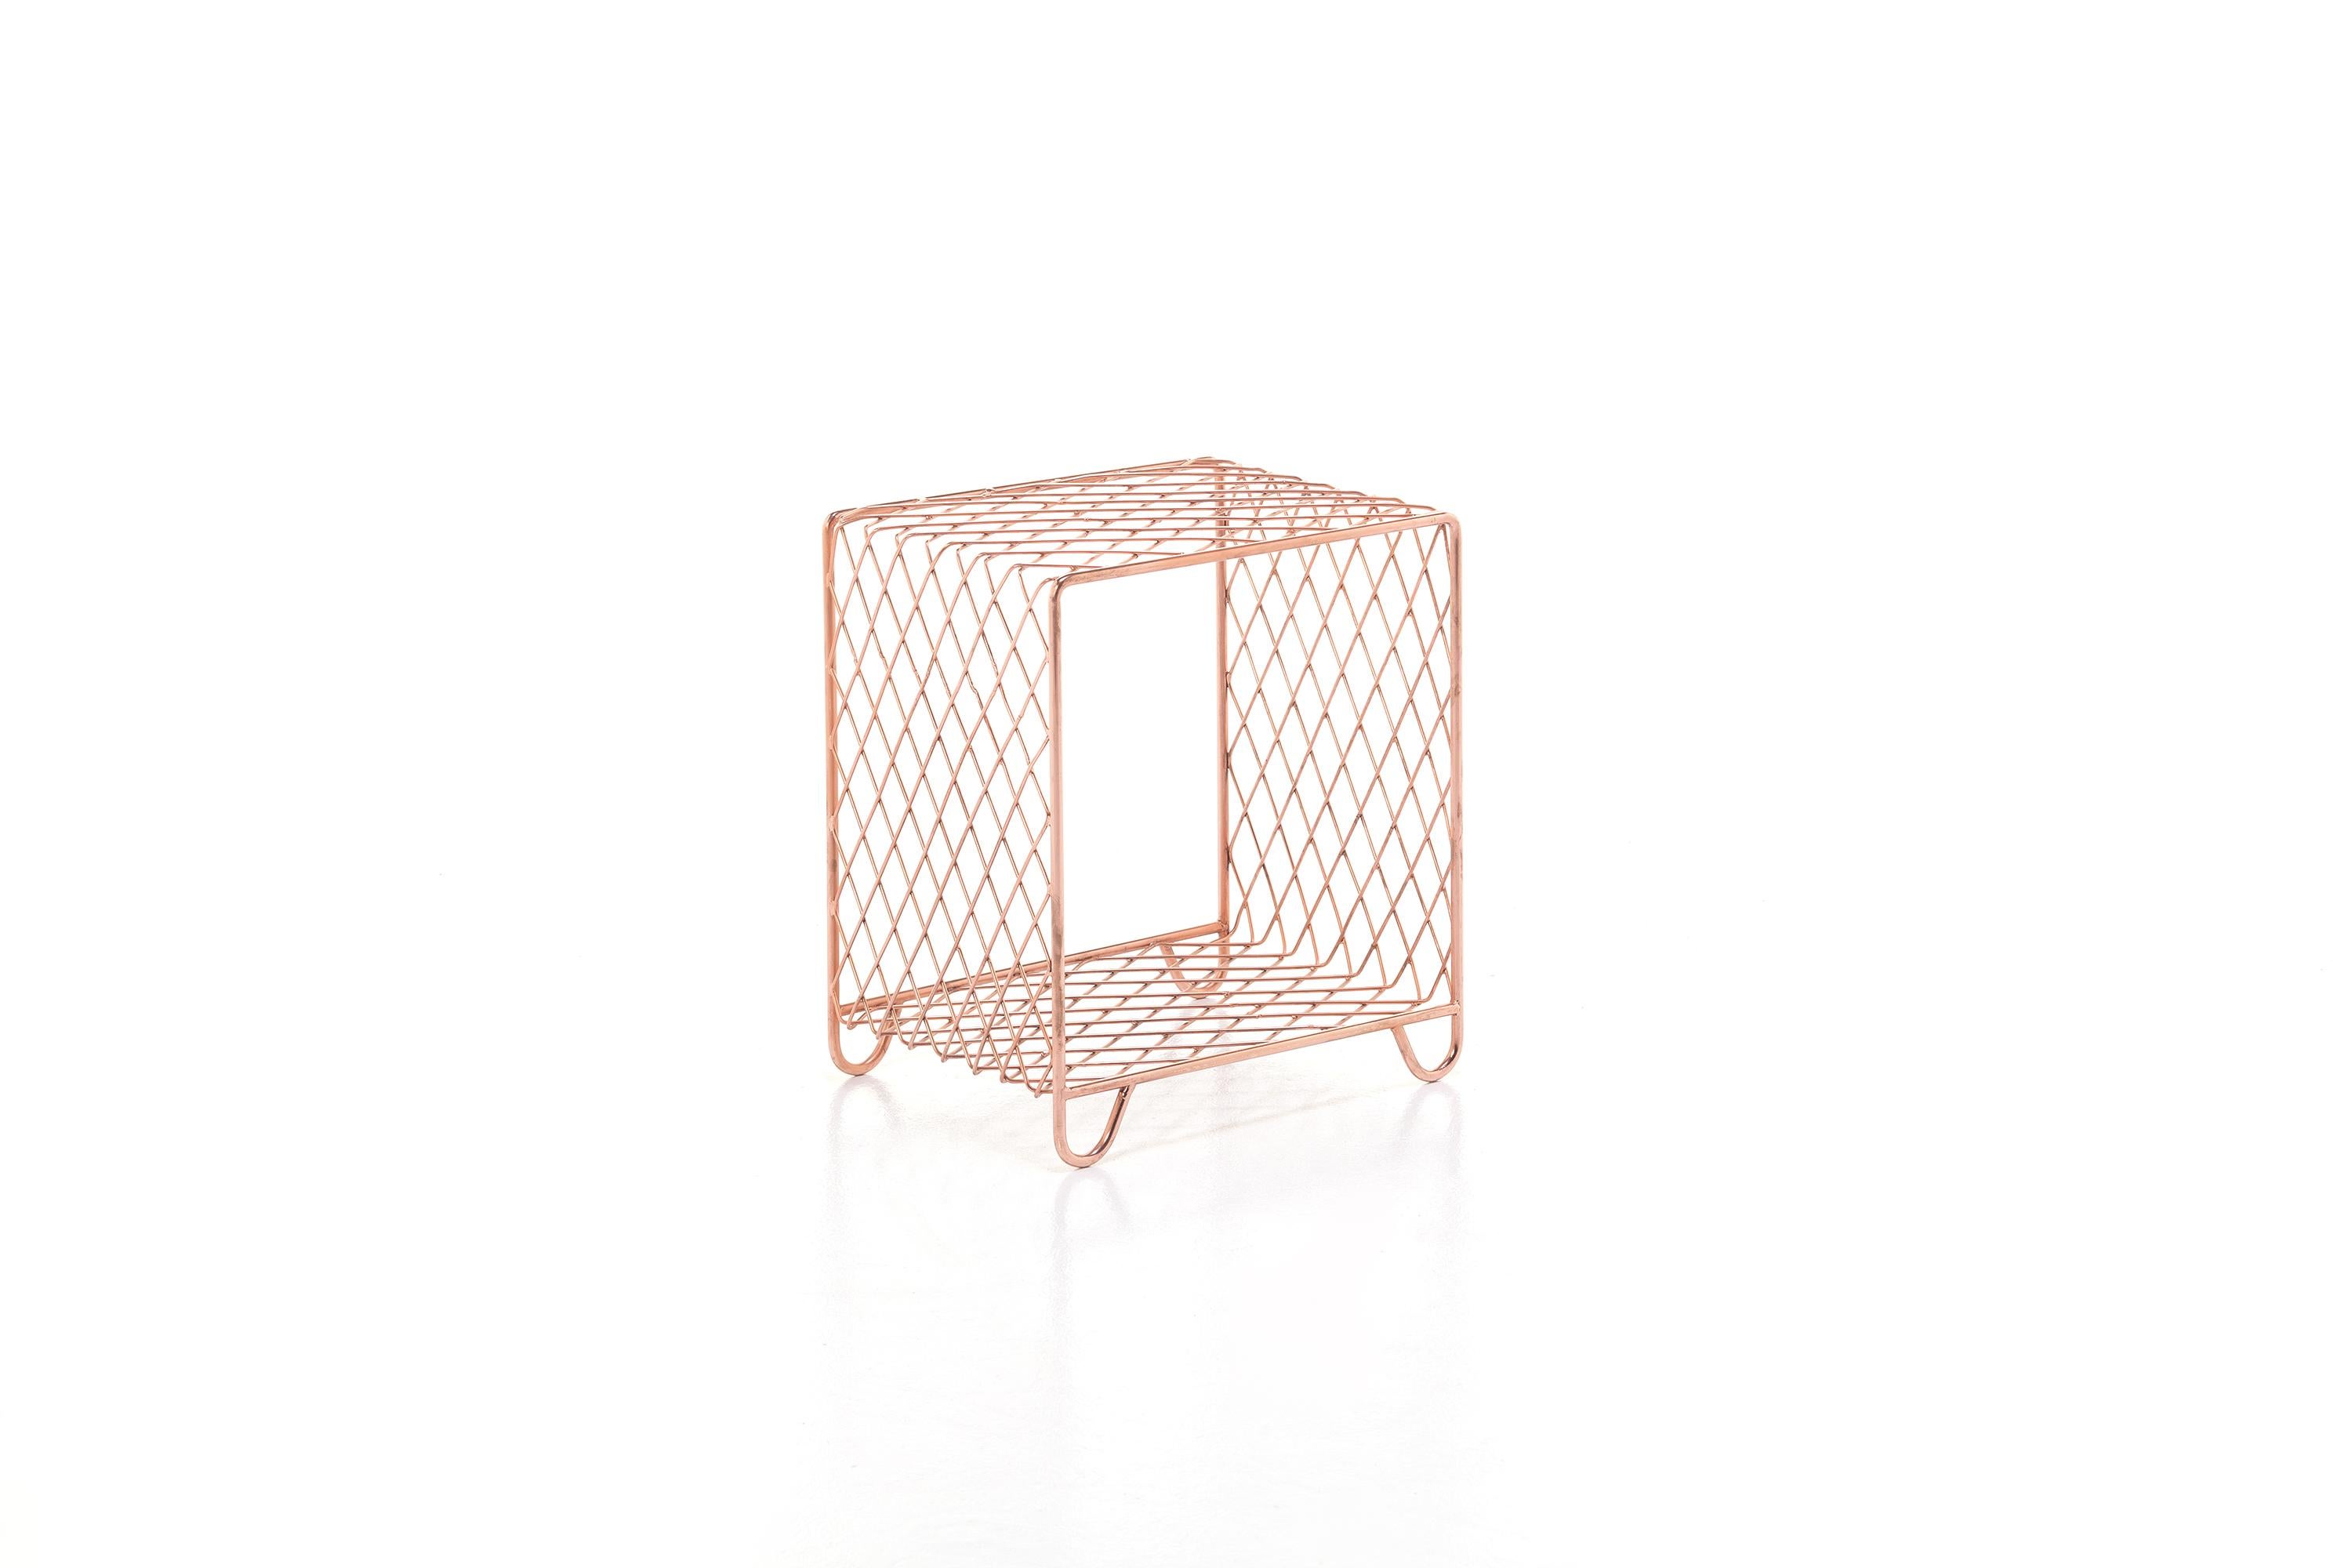 Contemporary Gervasoni Cross 42 Side Table in Copper Plated Steel by Paola Navone For Sale